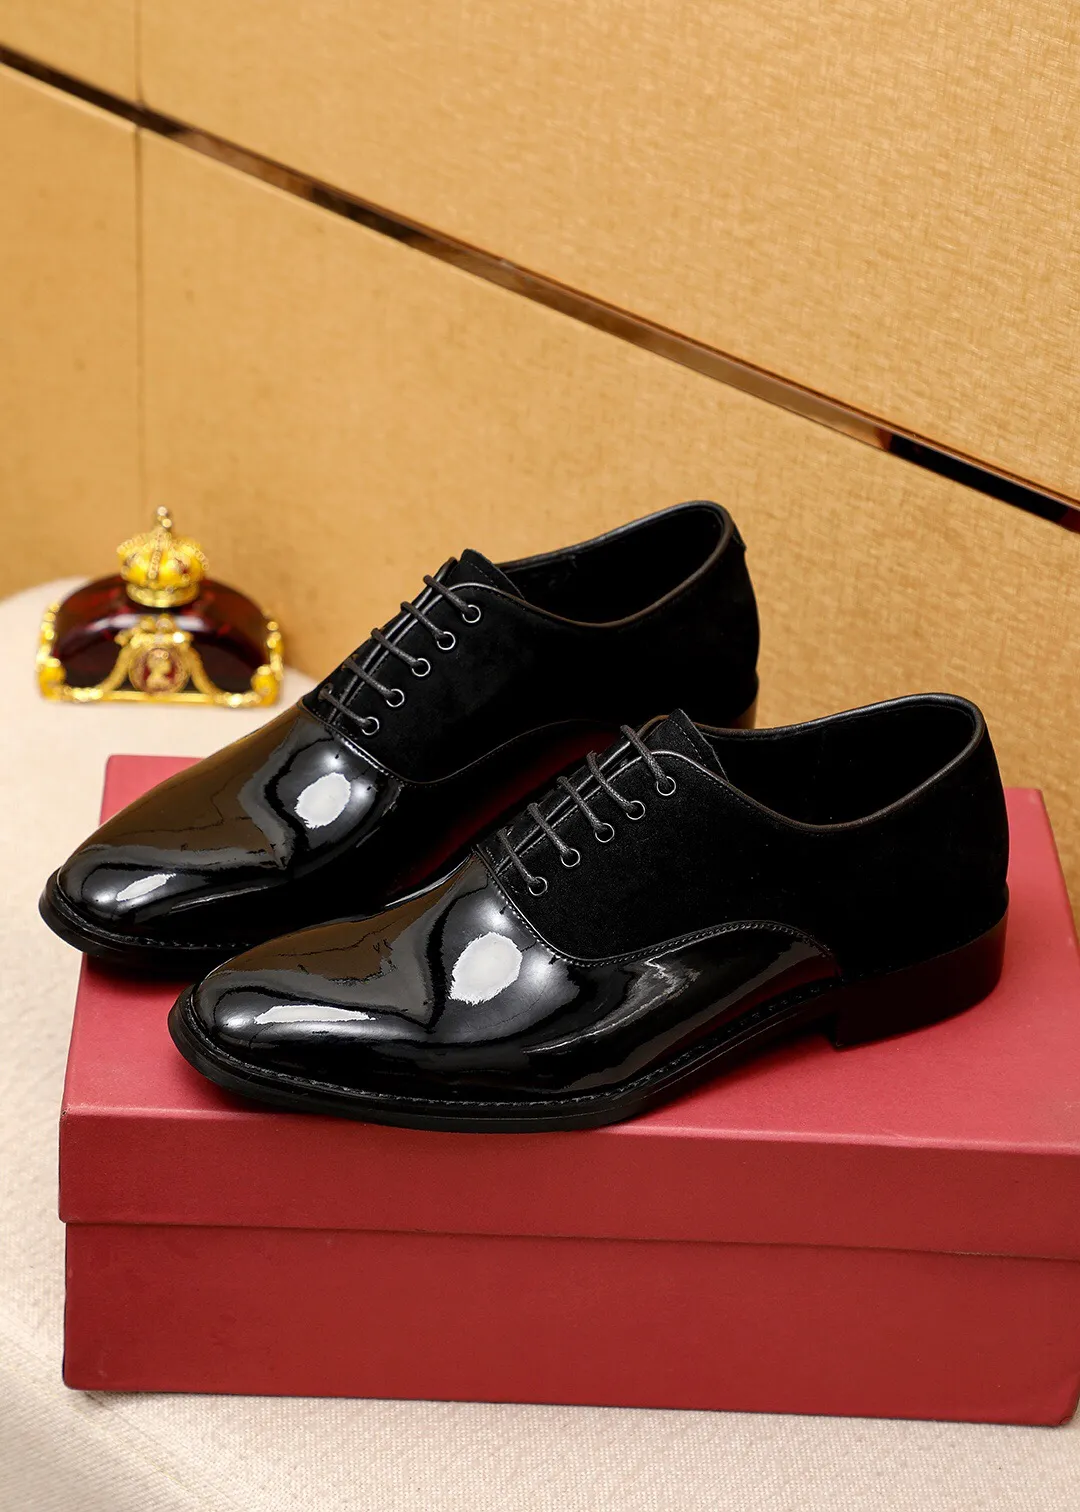 2023 Mens Walking Dress Shoes Genuine Leather Male Brand Designer Formal Wedding Party Business Flats Size 38-45